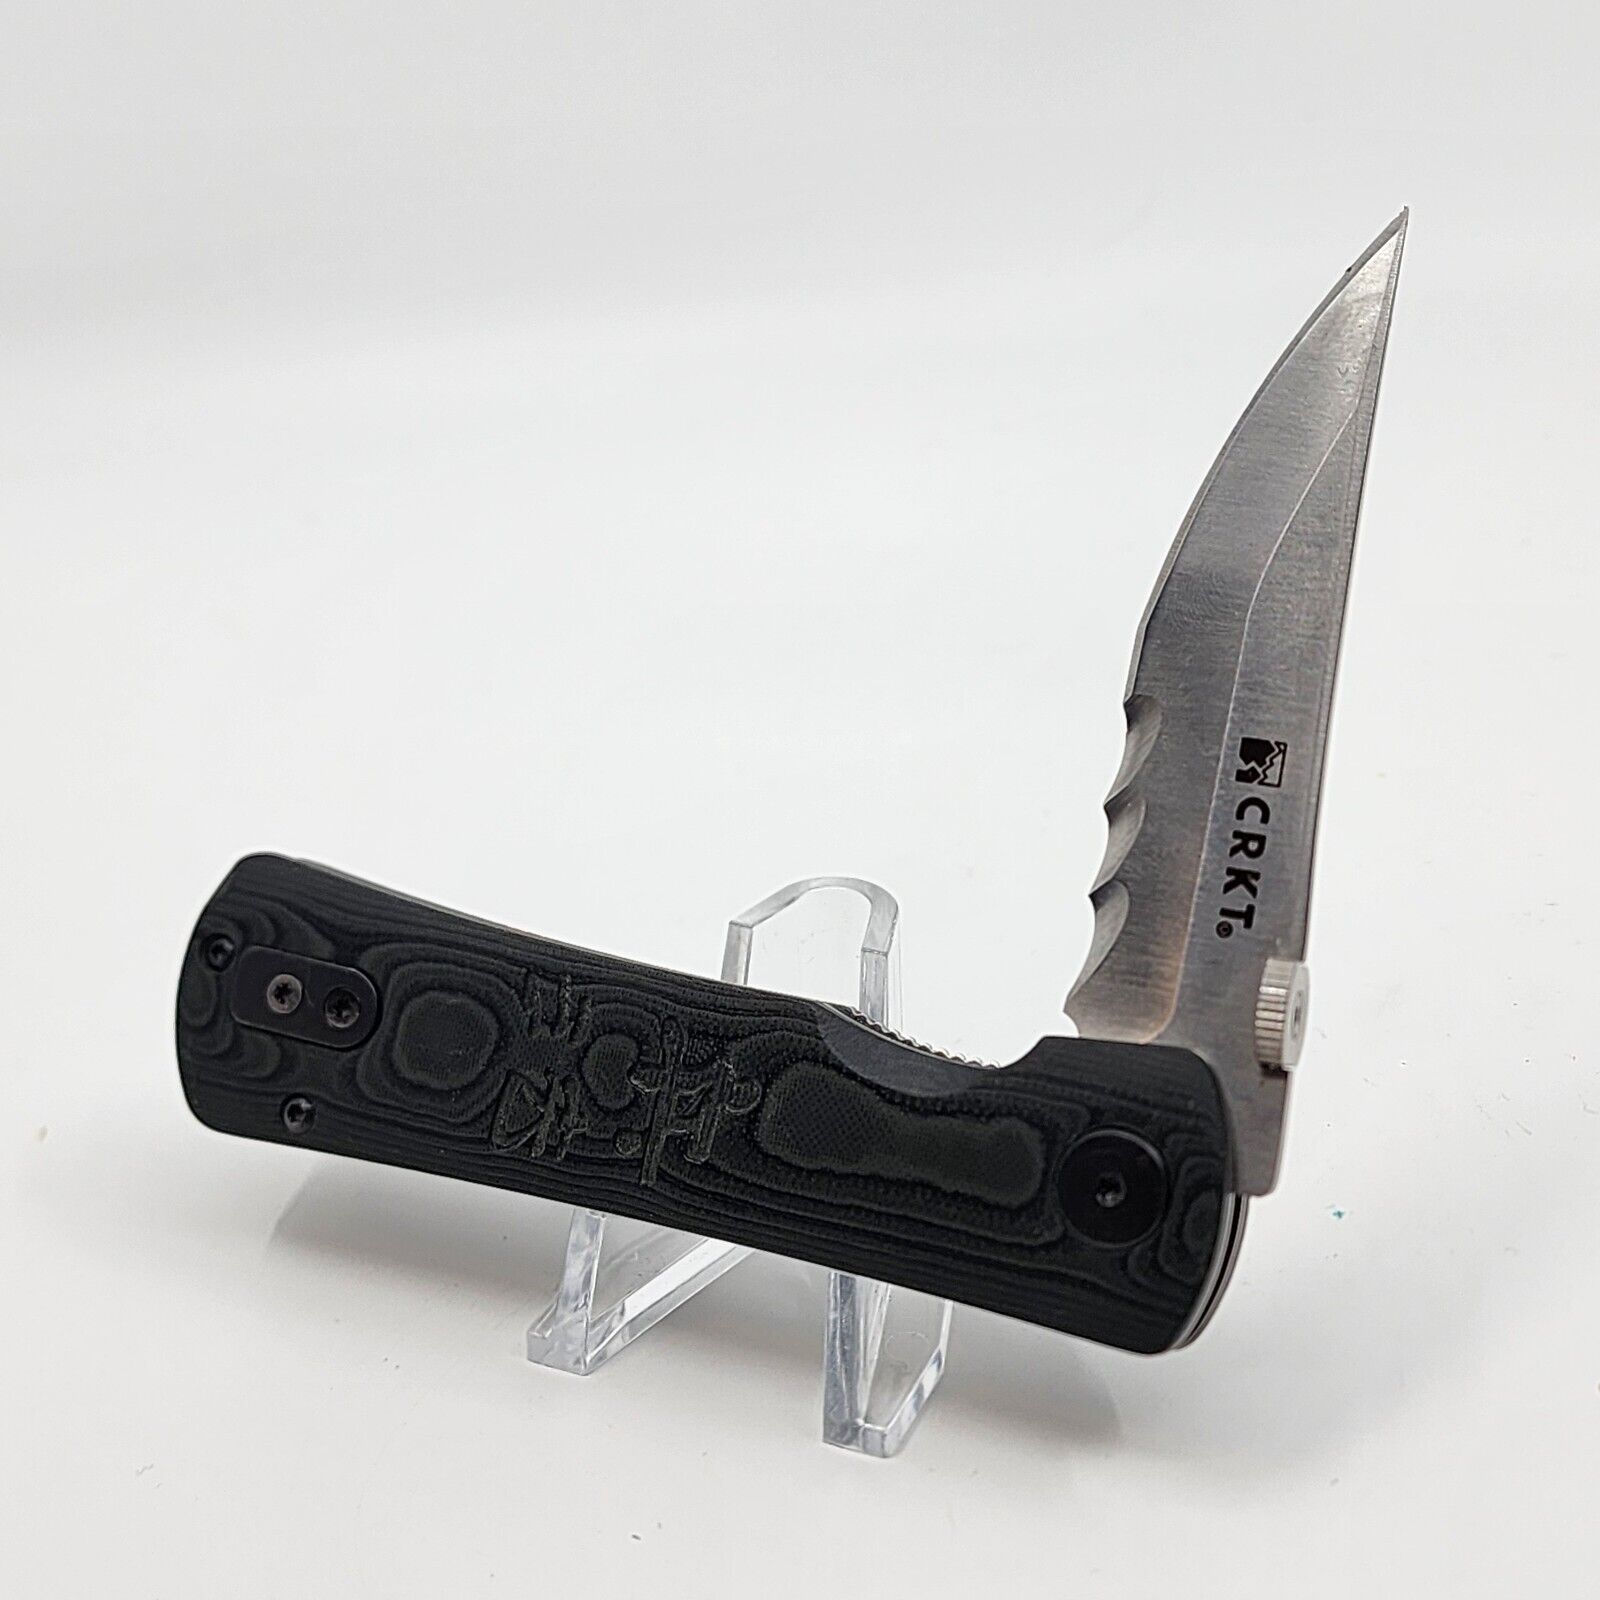 Crkt Heiho Knife Discontinued First Production Fast, Dbl Lock Rare Great Knife